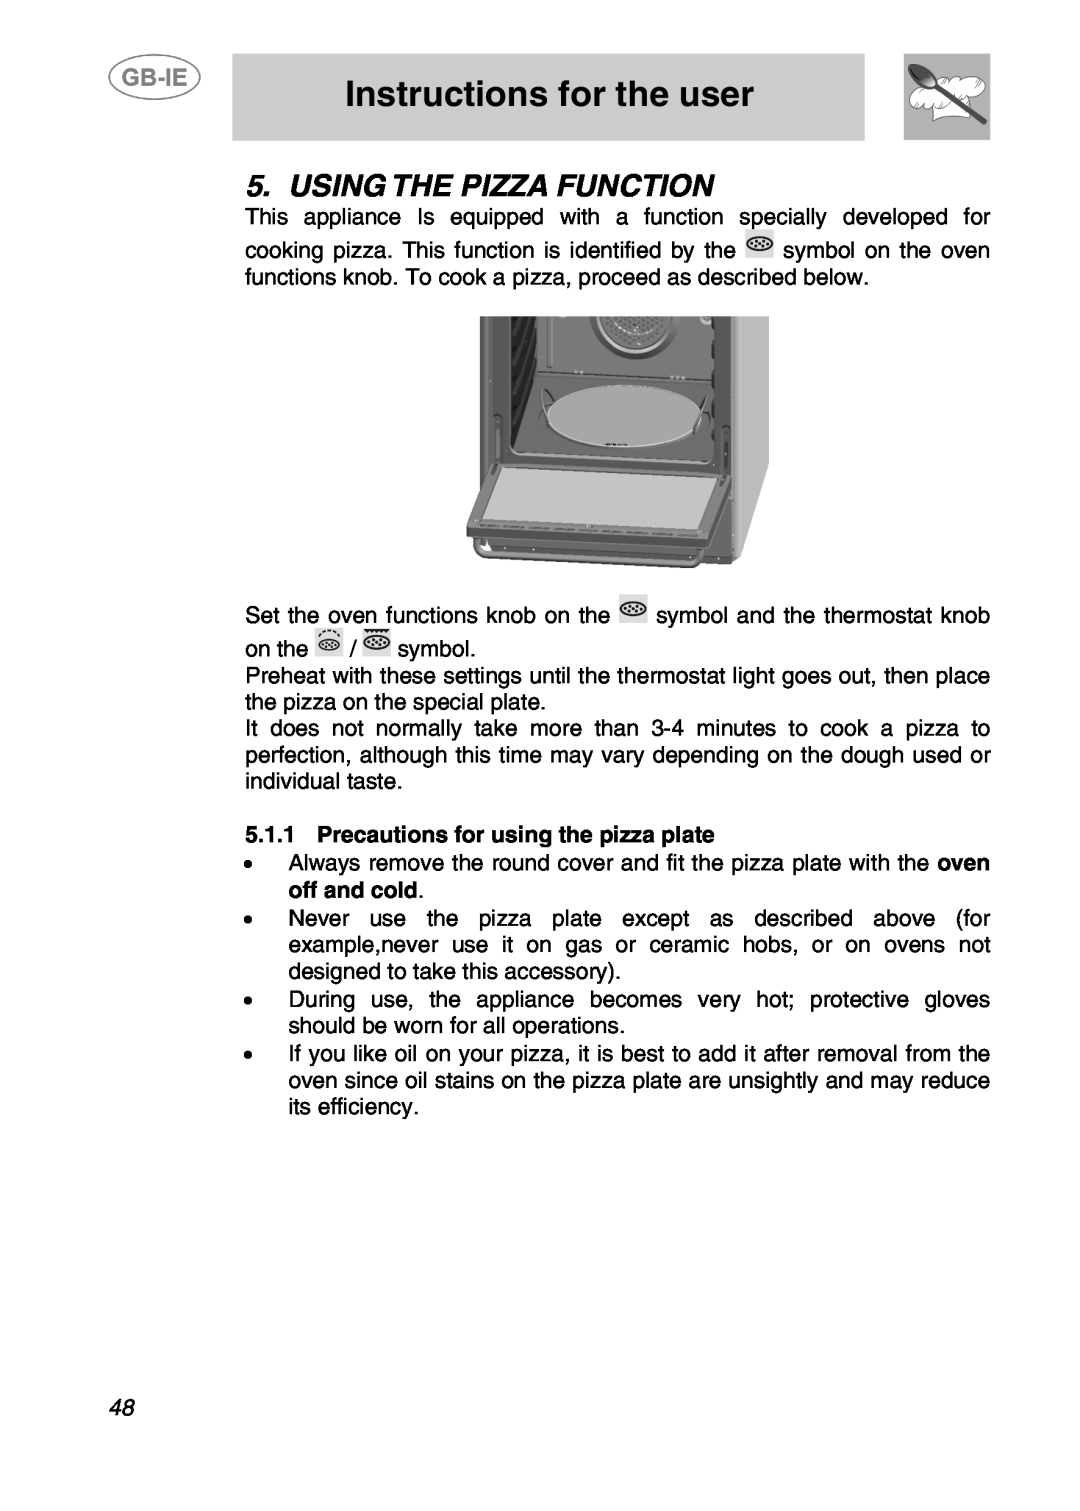 Smeg 166PZ-5 manual Using The Pizza Function, Instructions for the user, 5.1.1Precautions for using the pizza plate 